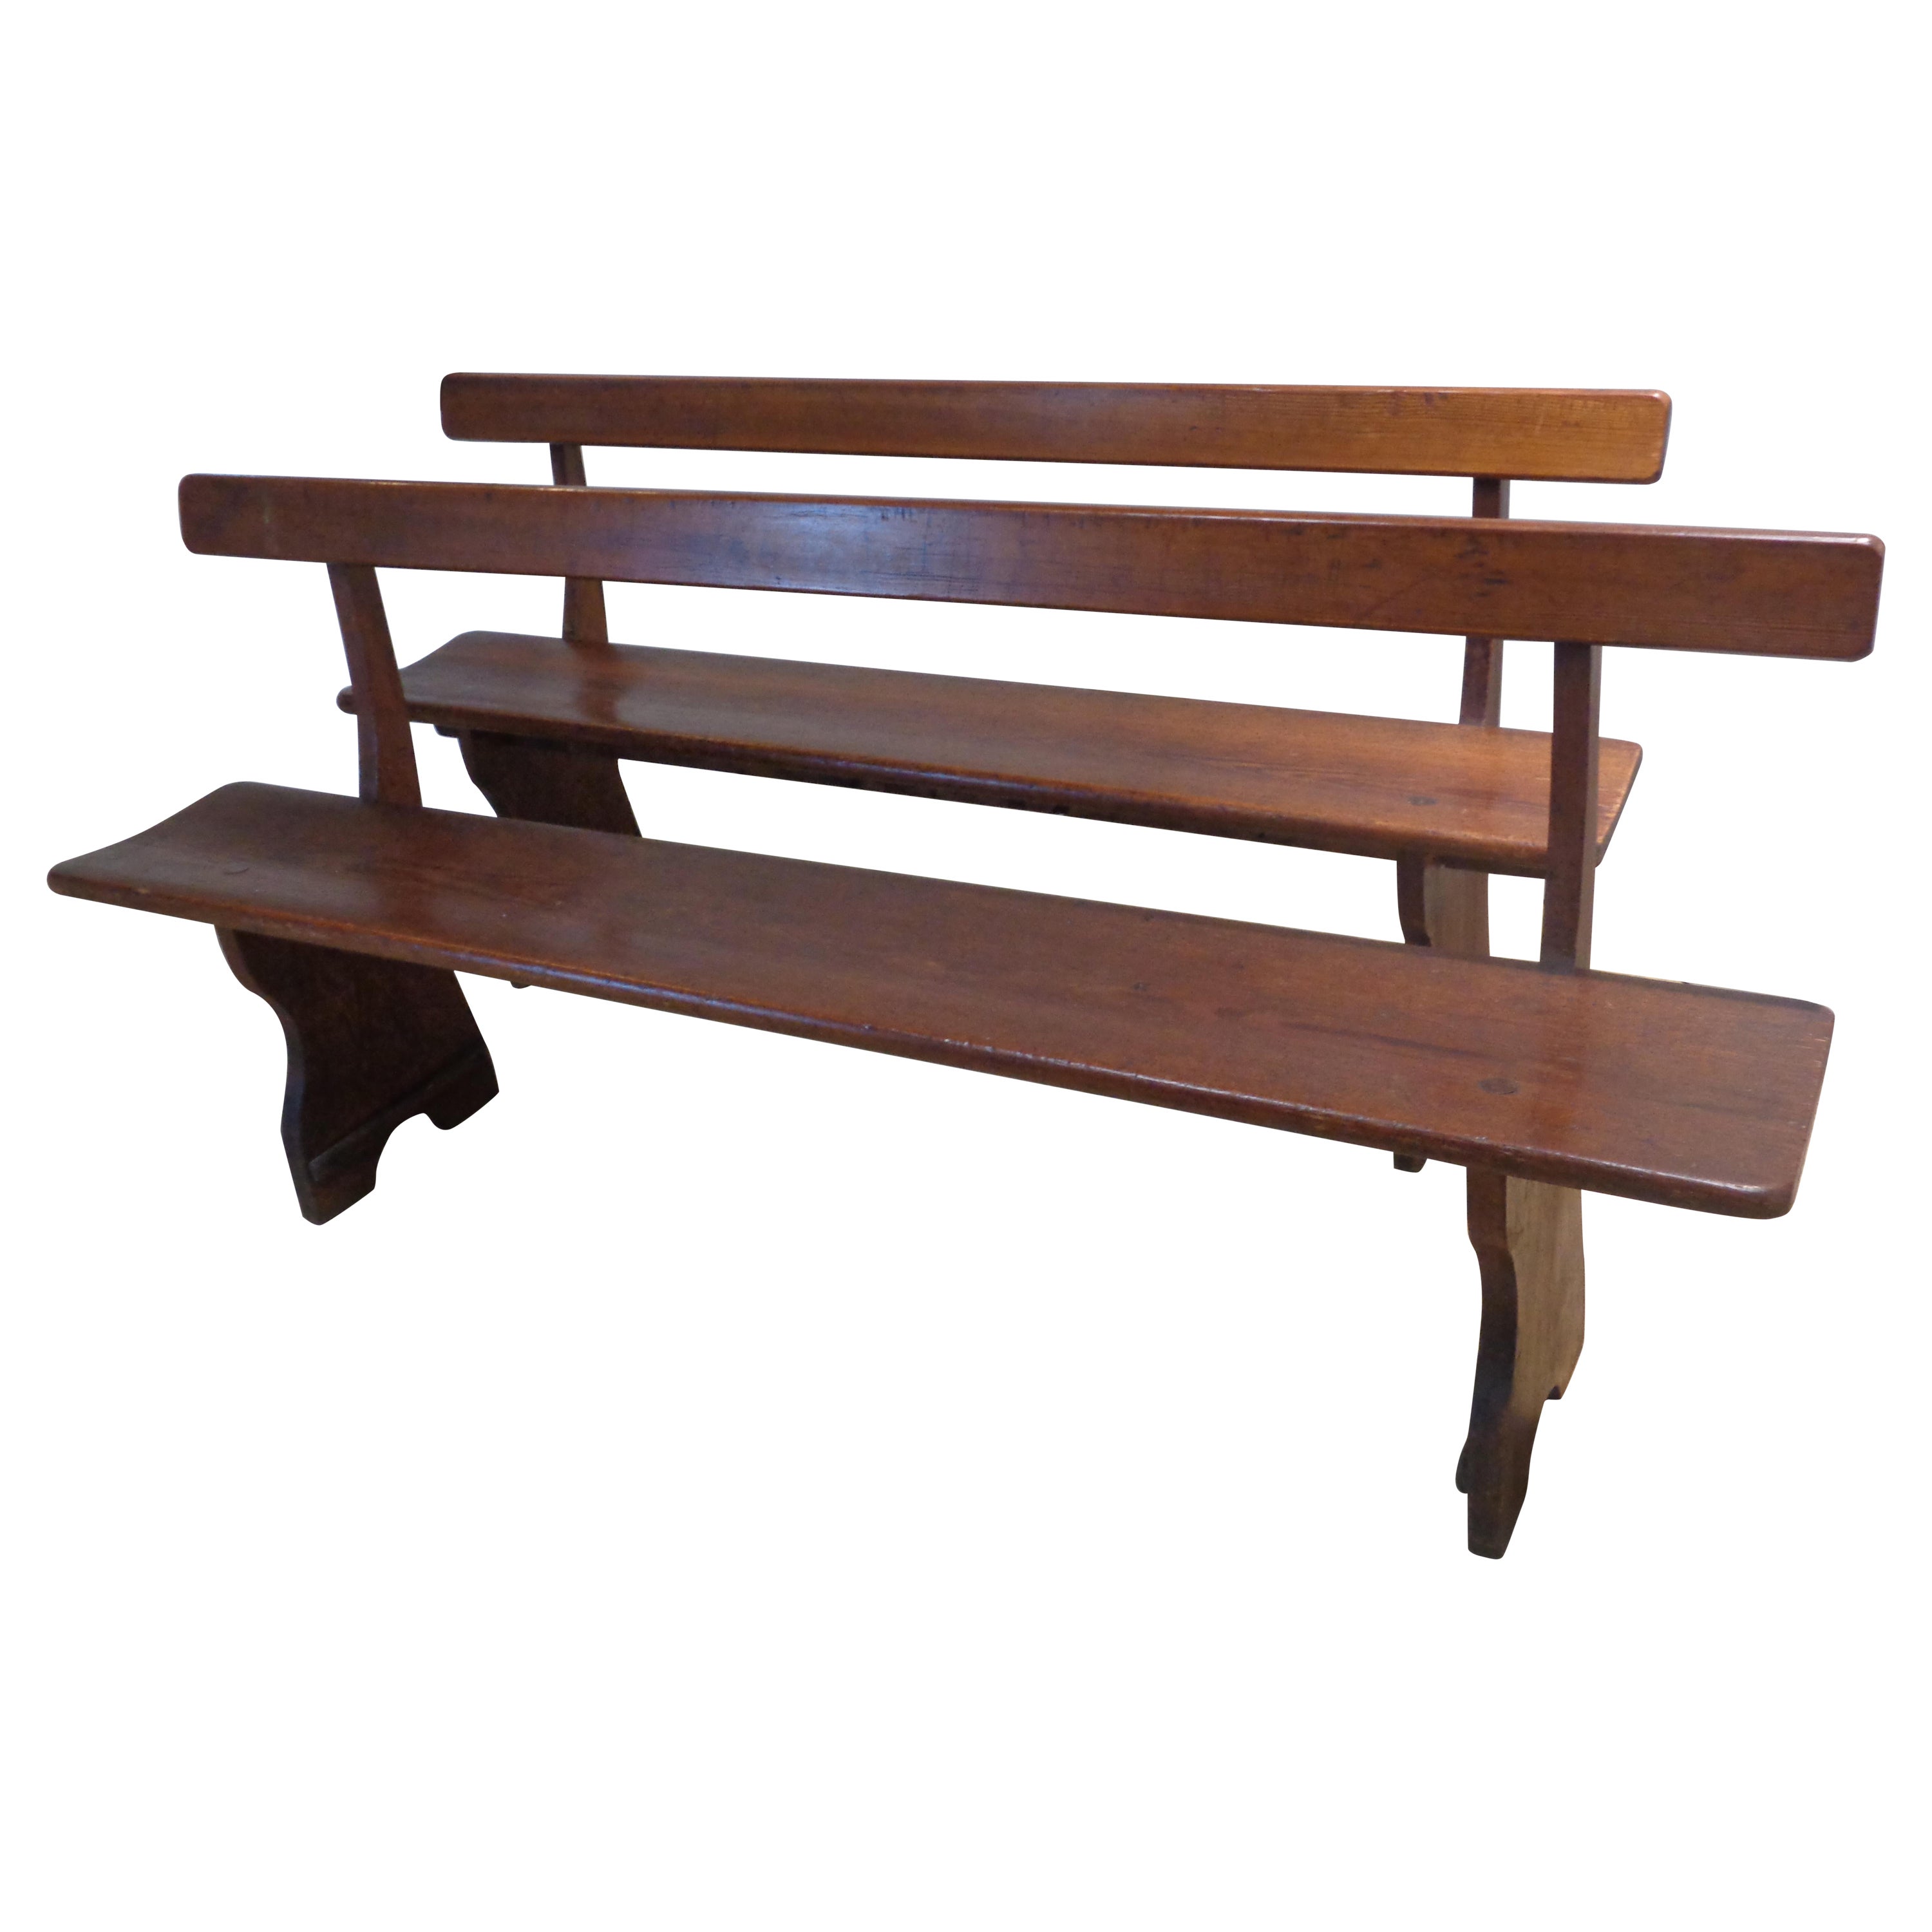  Exceptional Antique American Country Benches For Sale